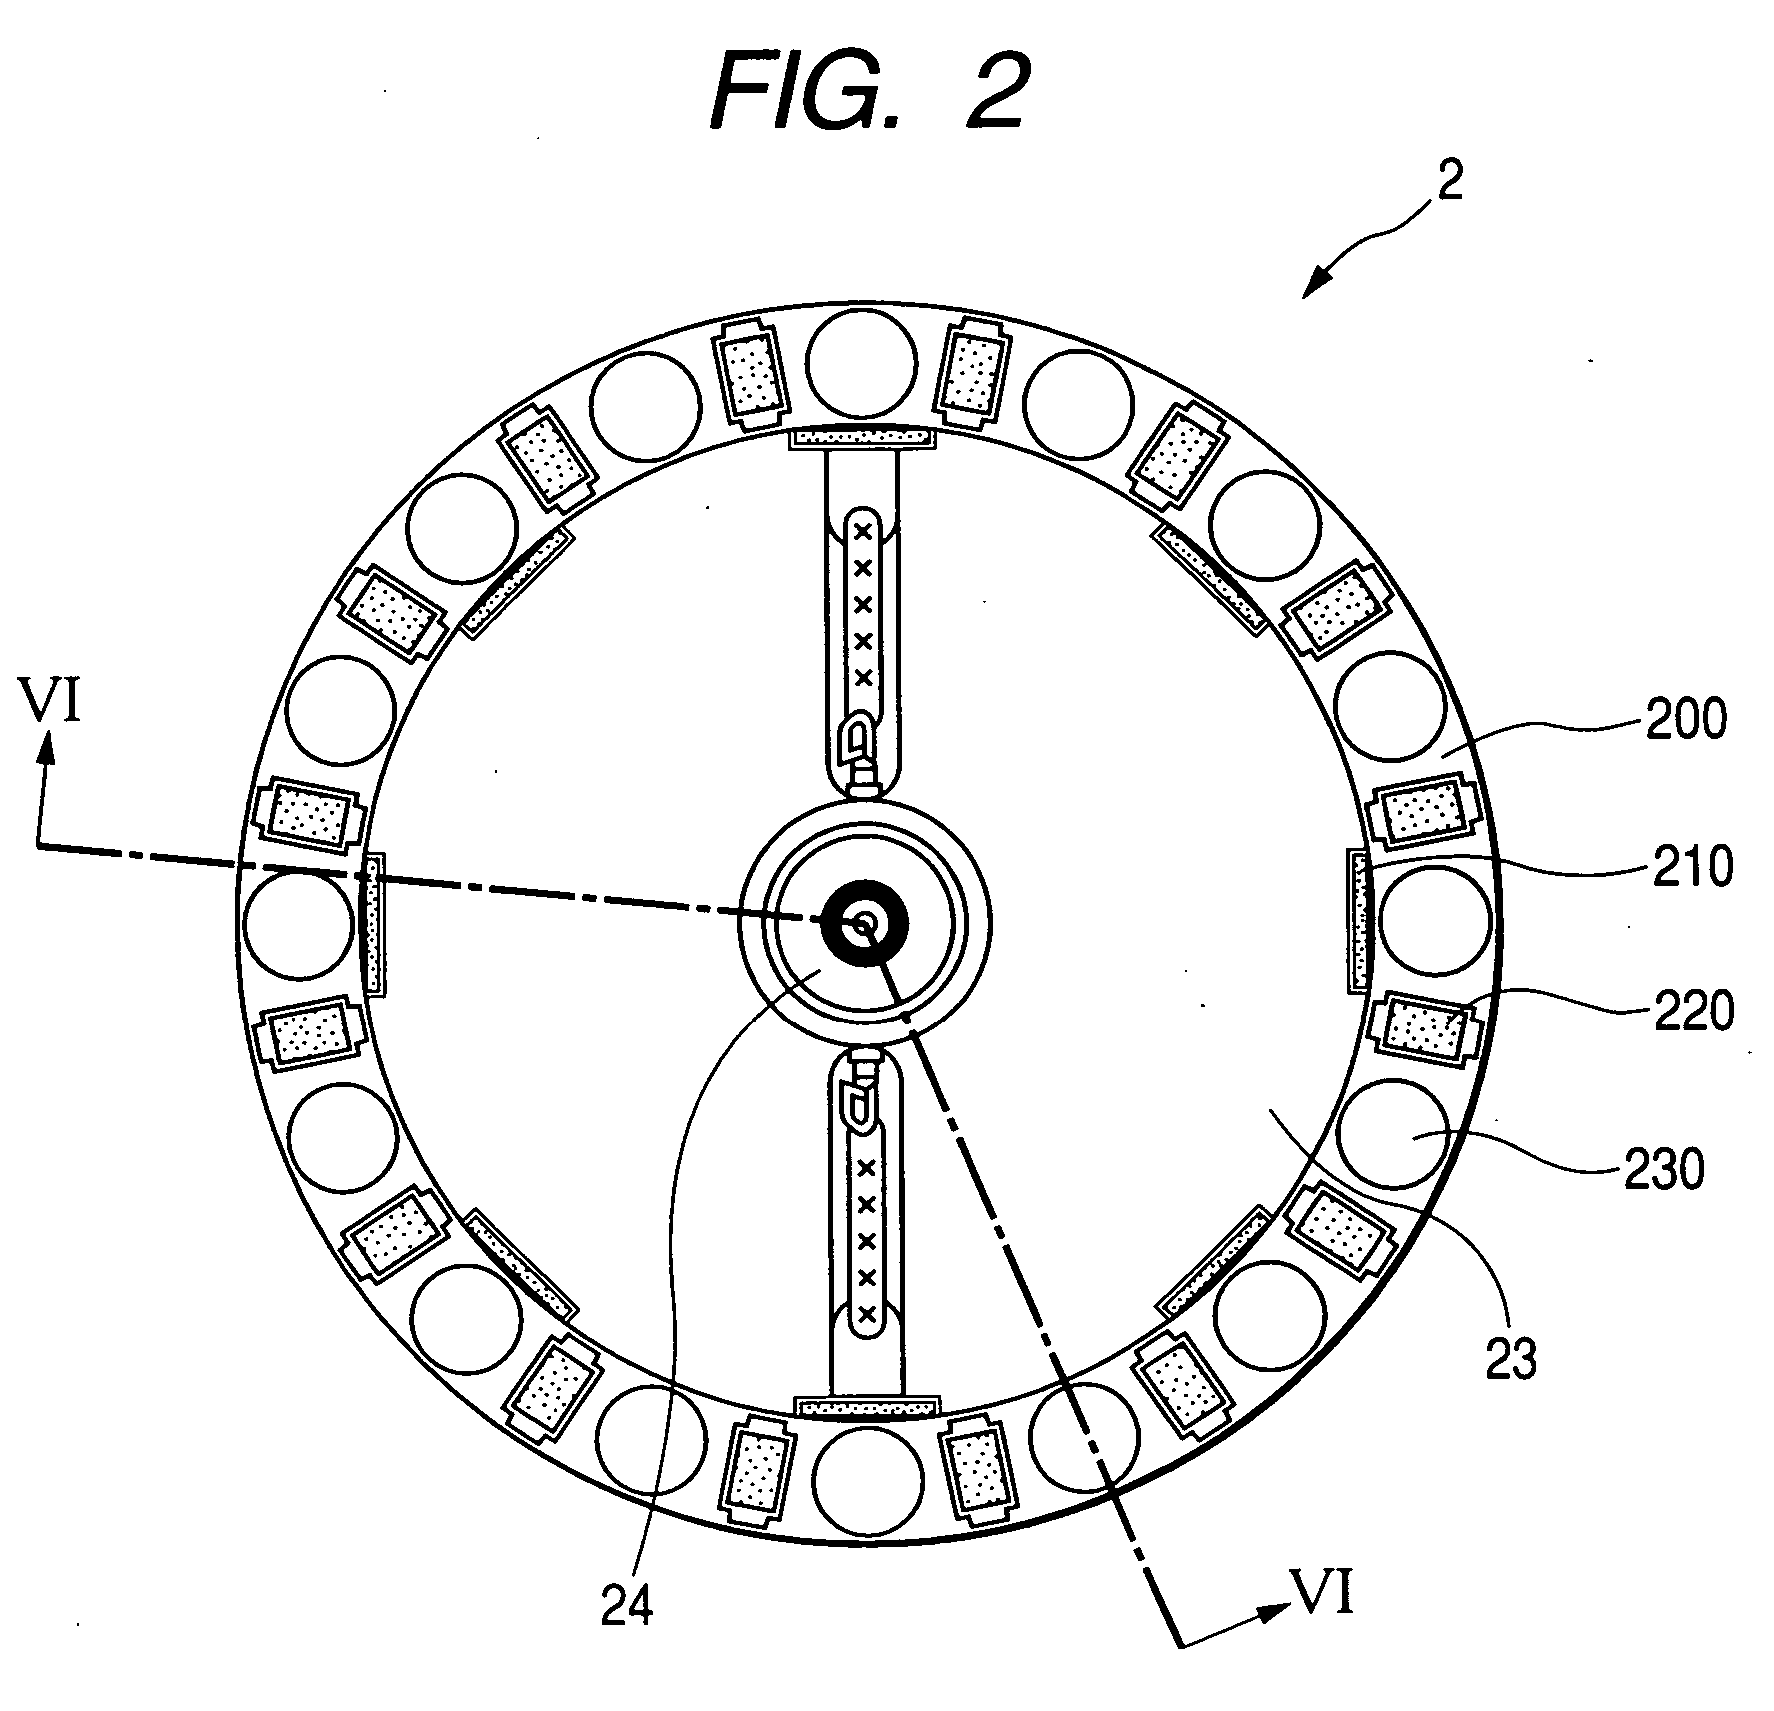 Motor vehicle AC generator having a rotor incorporating a field winding and permanent magnets